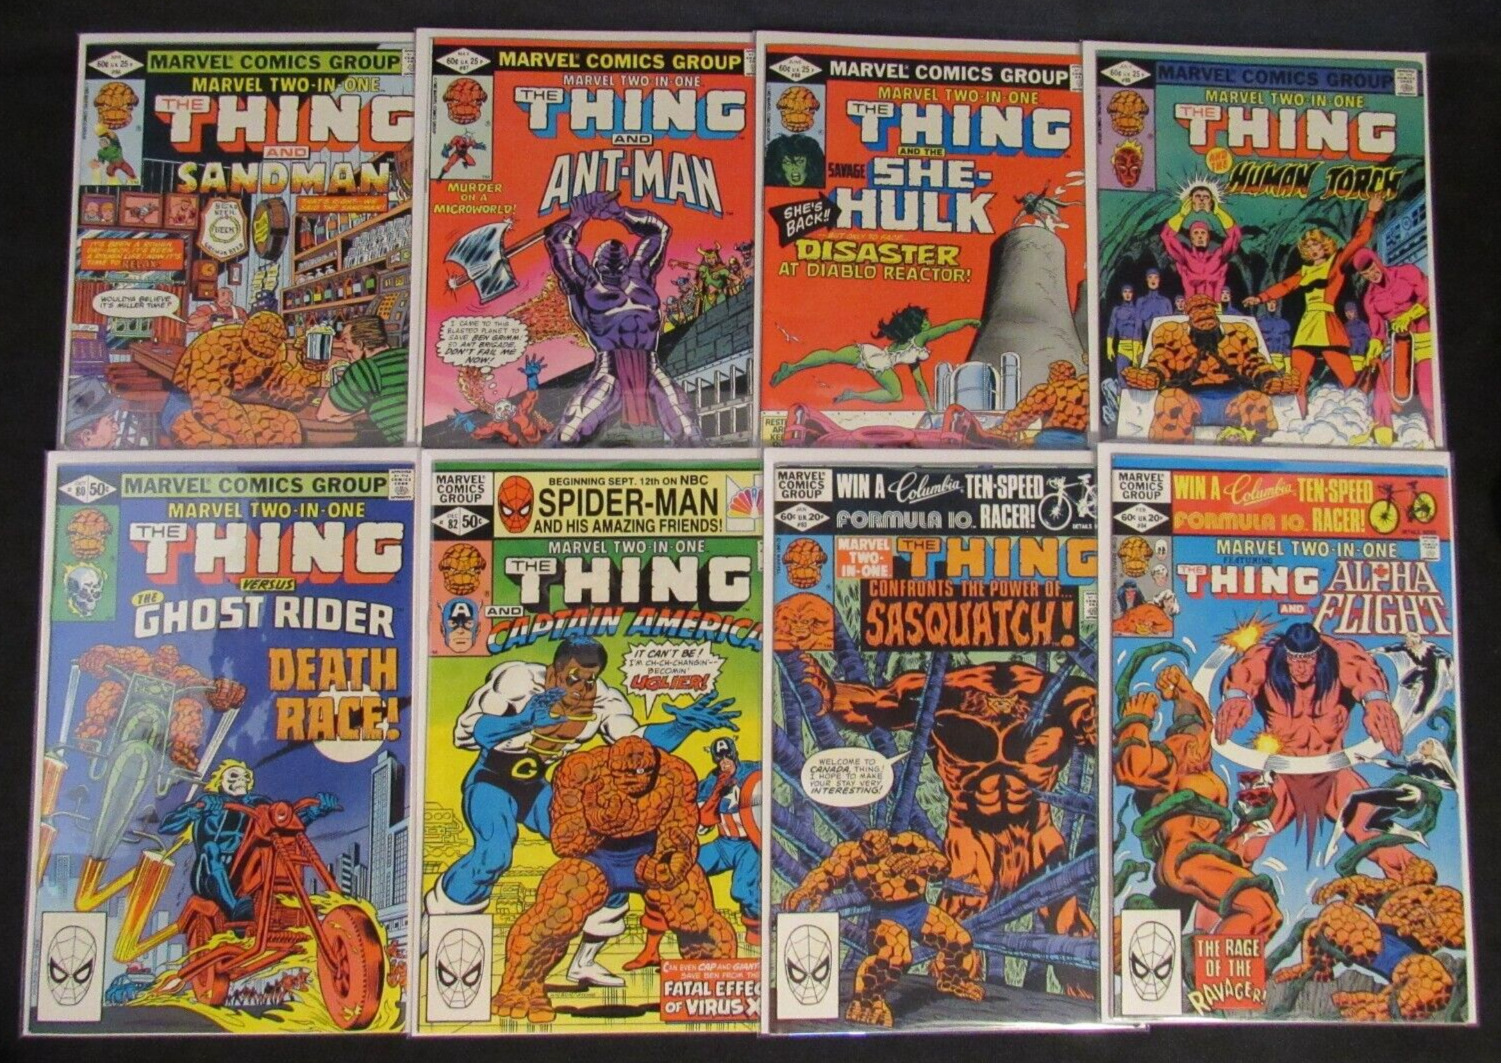 Marvel Two-In-One Bronze Age Lot #80, 82, 83, 84, 86, 87, 88, 89 PX952